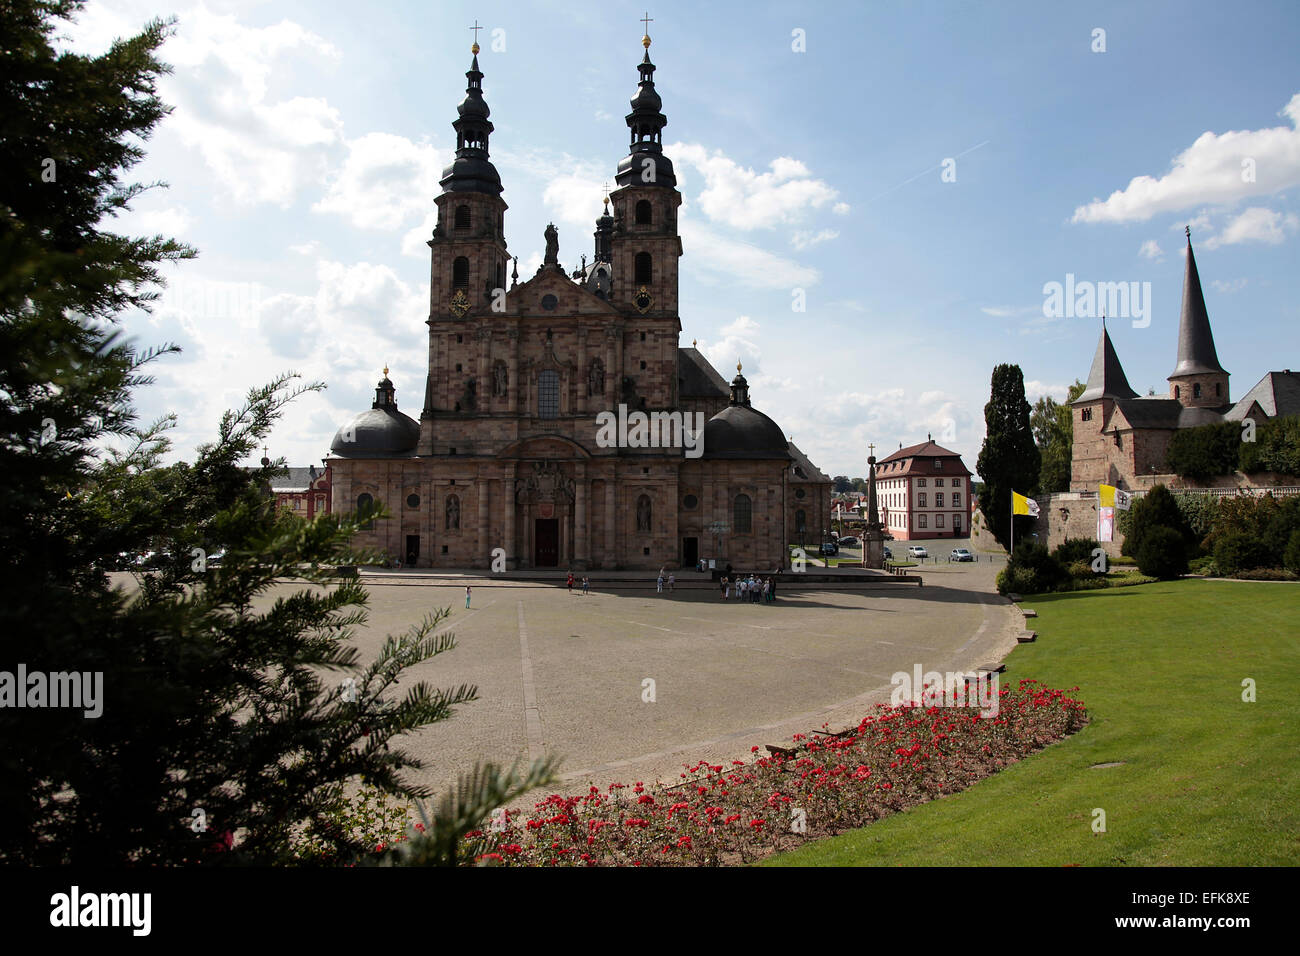 The Fulda Cathedral and right St. Michael`s church. Fulda Cathedral is the landmark of Fulda and he is the most important Baroque church of Hessen. This catholic church was built between 1704 and 1712 by the famous architect Johann Dientzenhofer. Photo: K Stock Photo